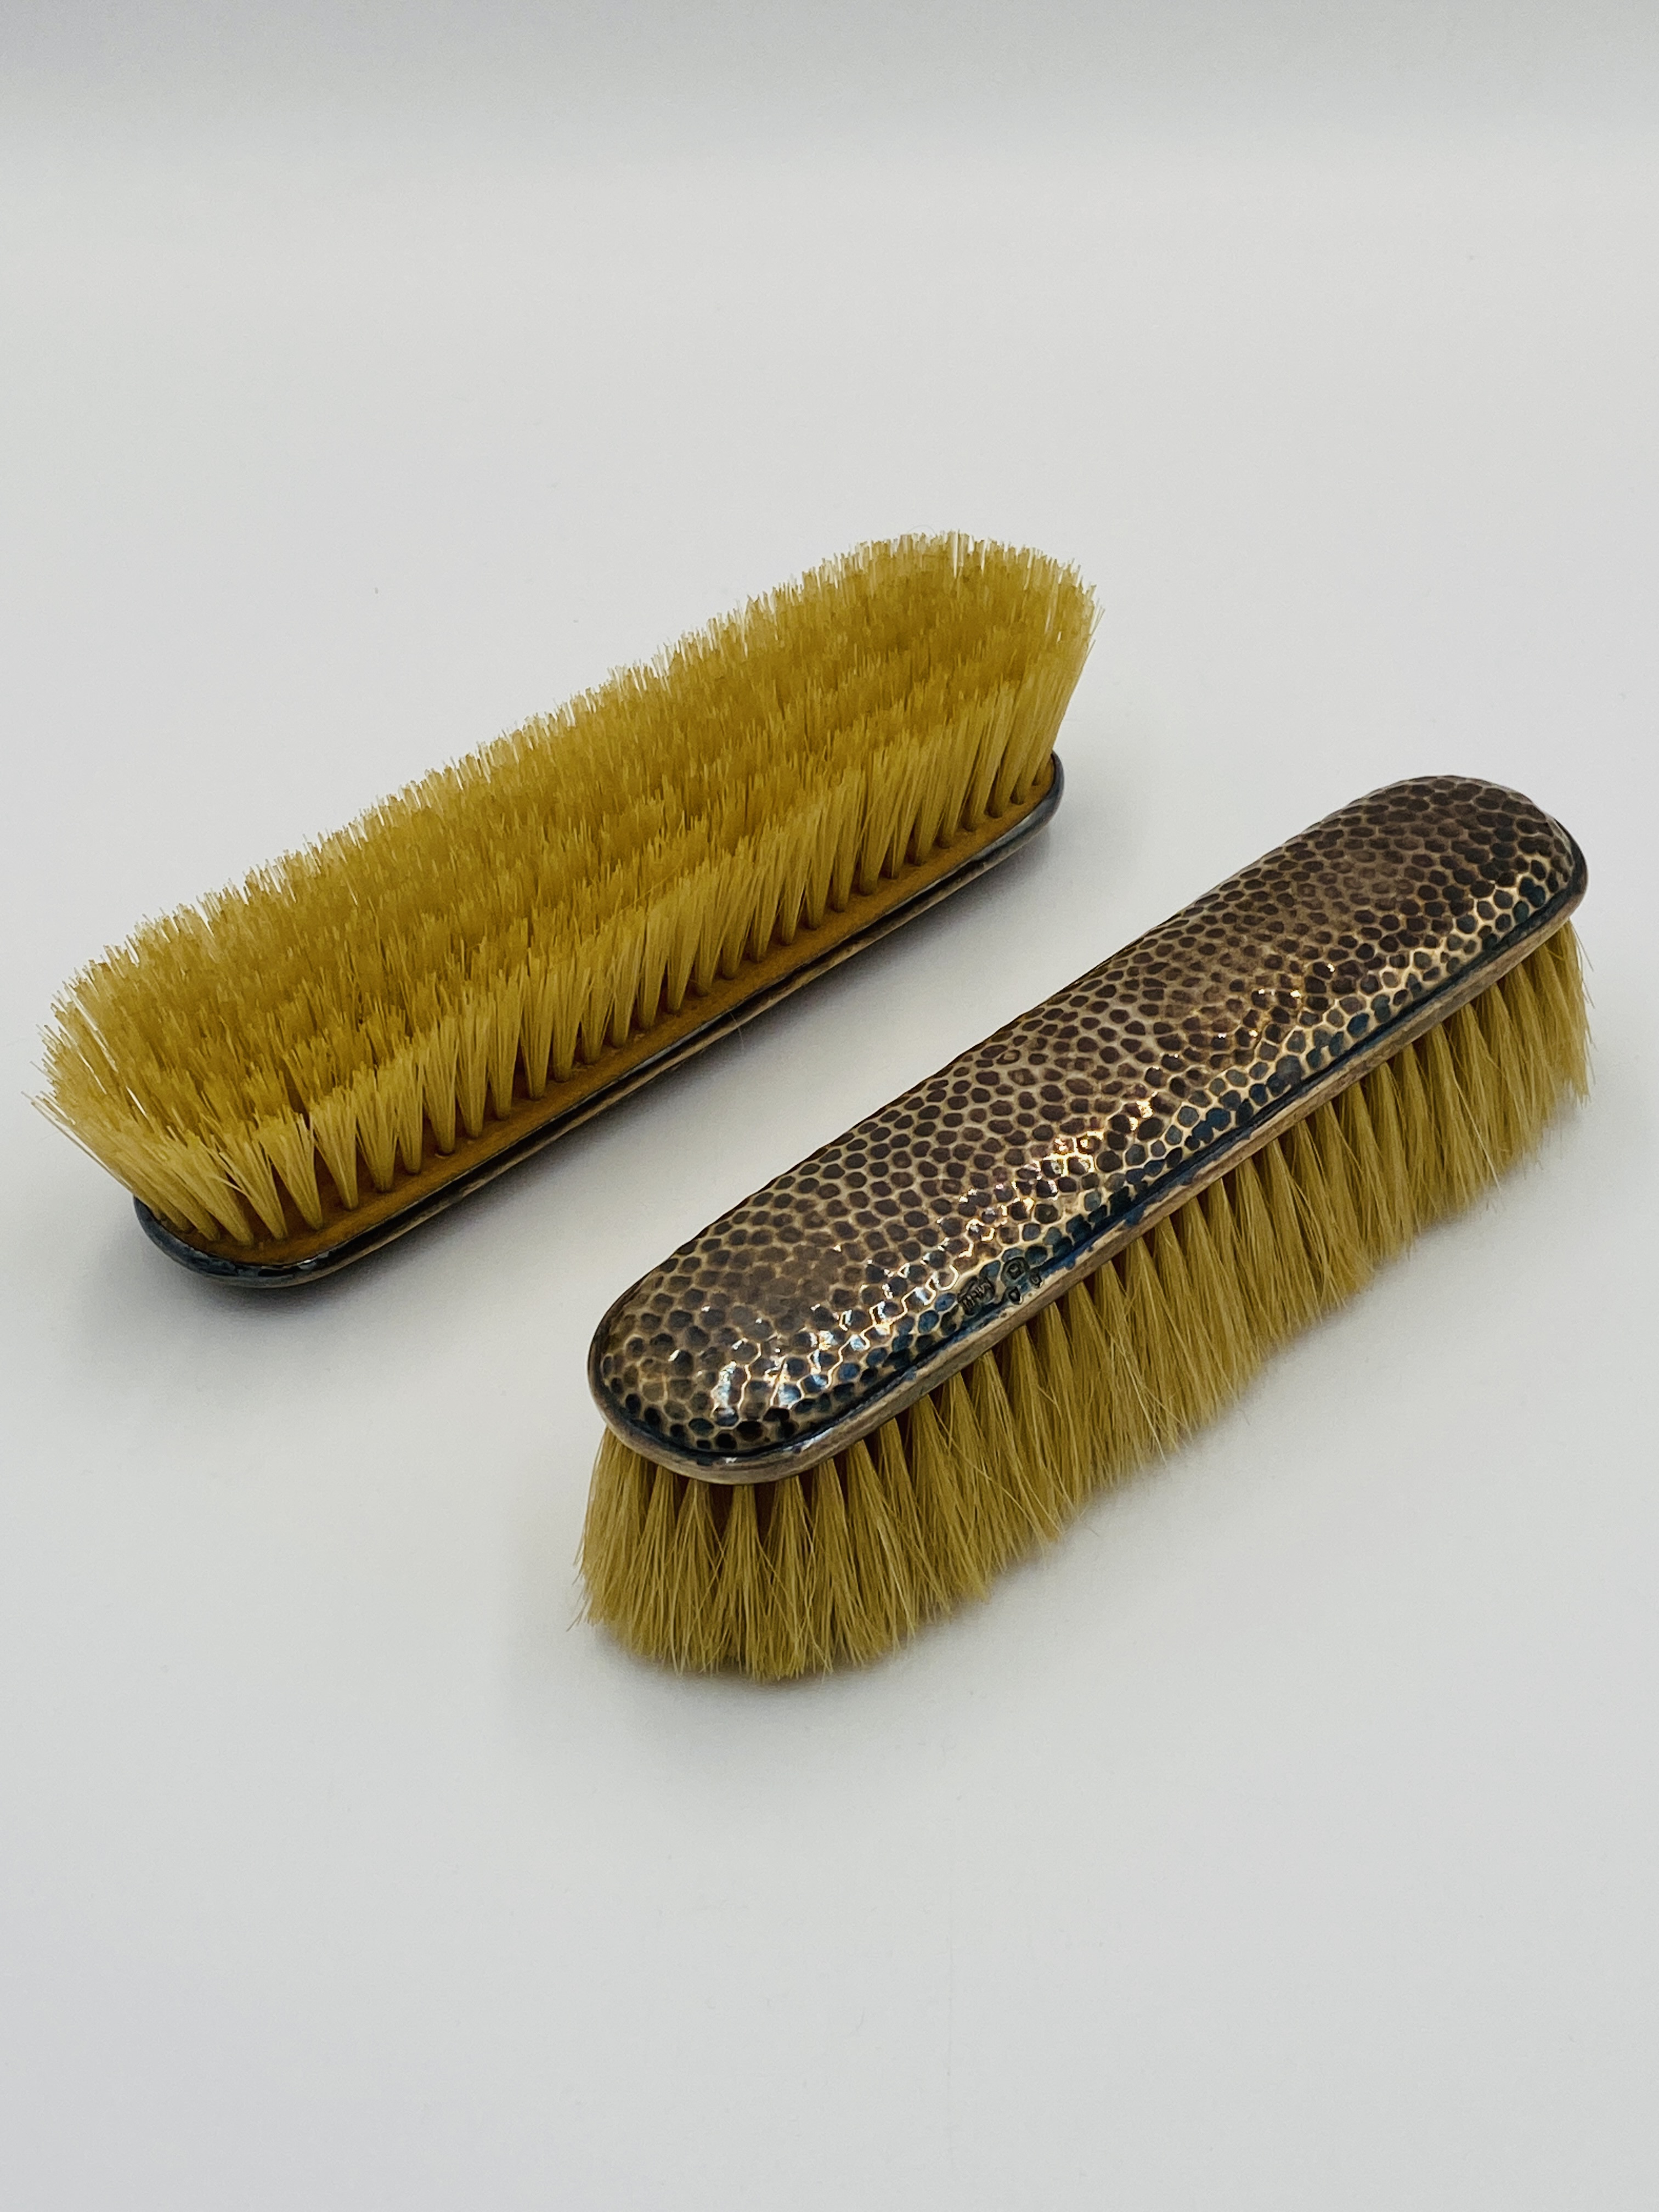 Silver backed dressing table mirror and brushes - Image 3 of 8